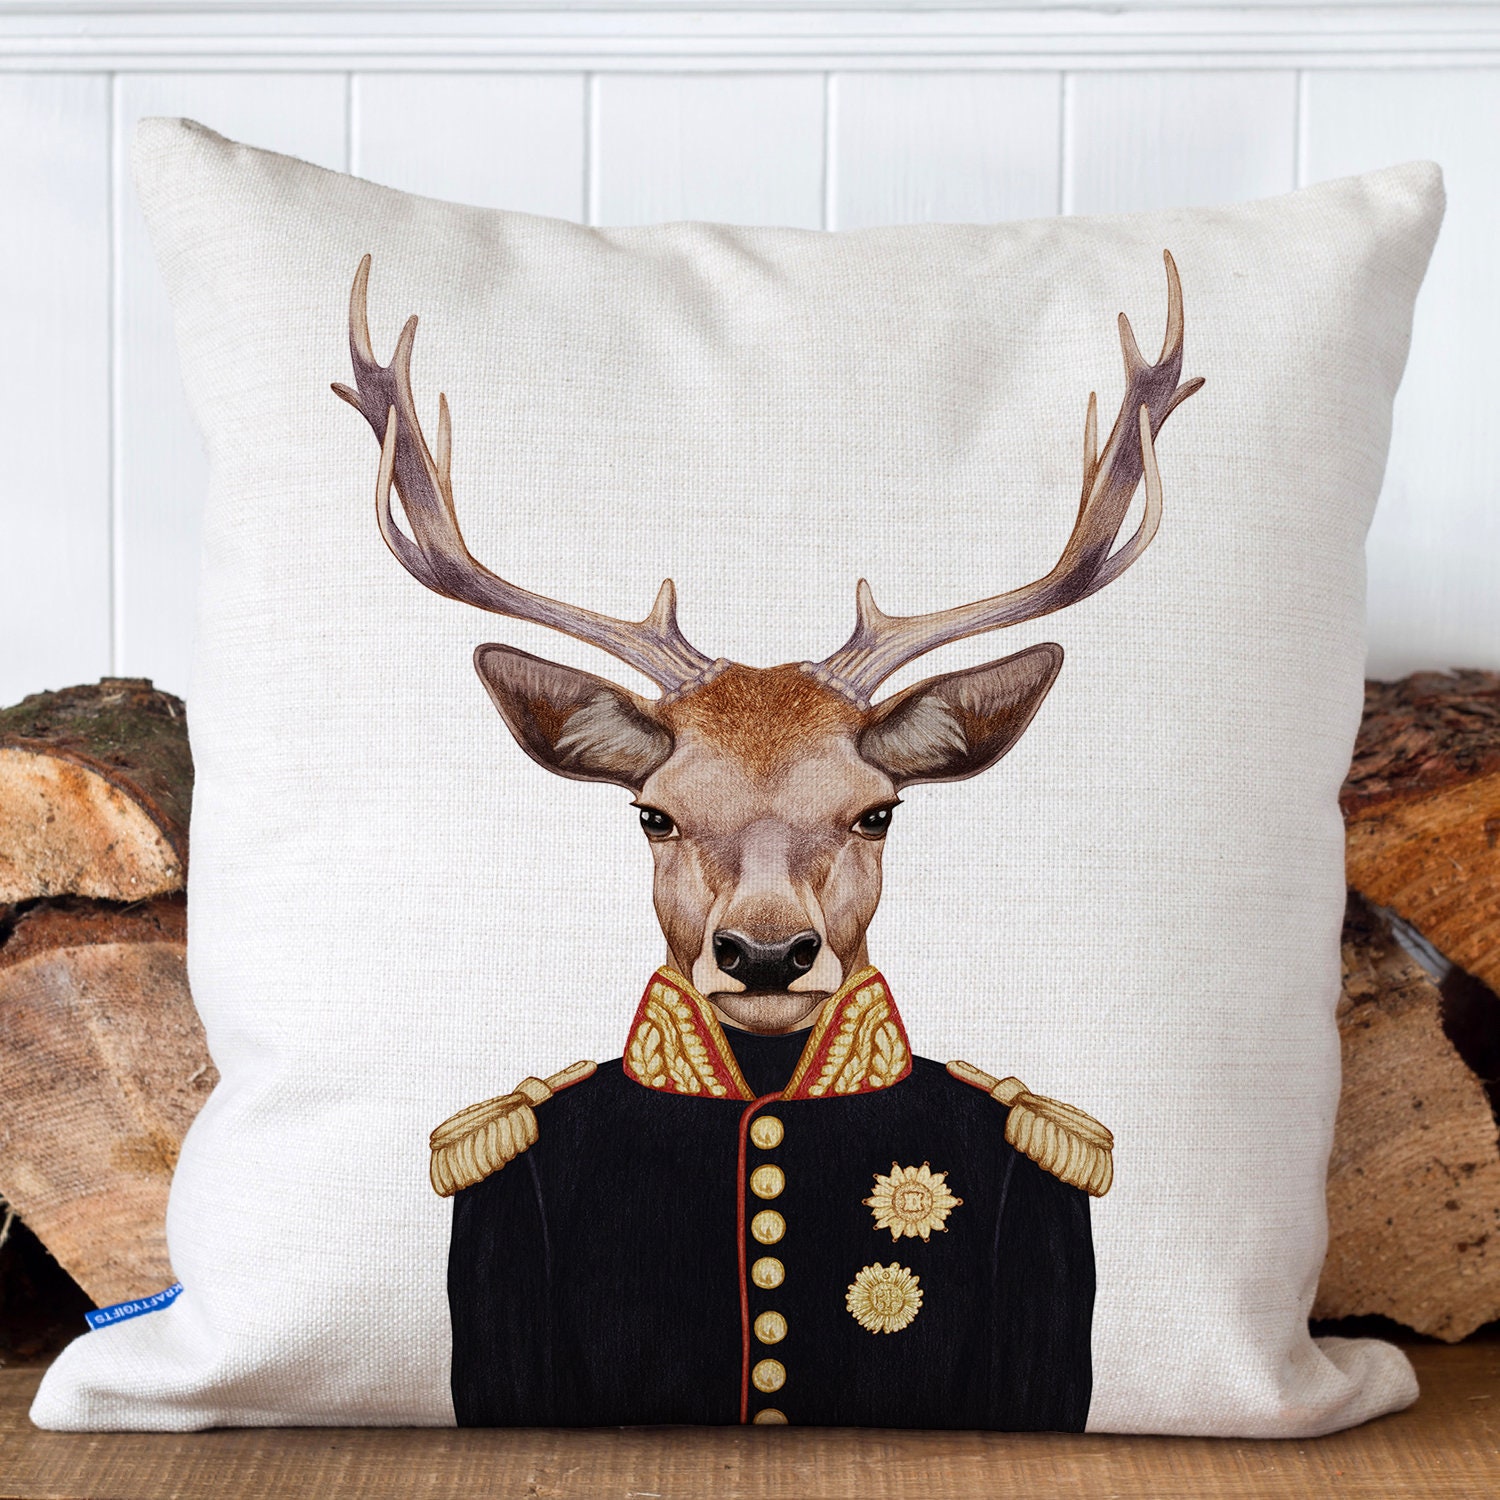 Highland Stag Cushion Cover Country Deer Scene Natural Linen Look Fabric 16" 